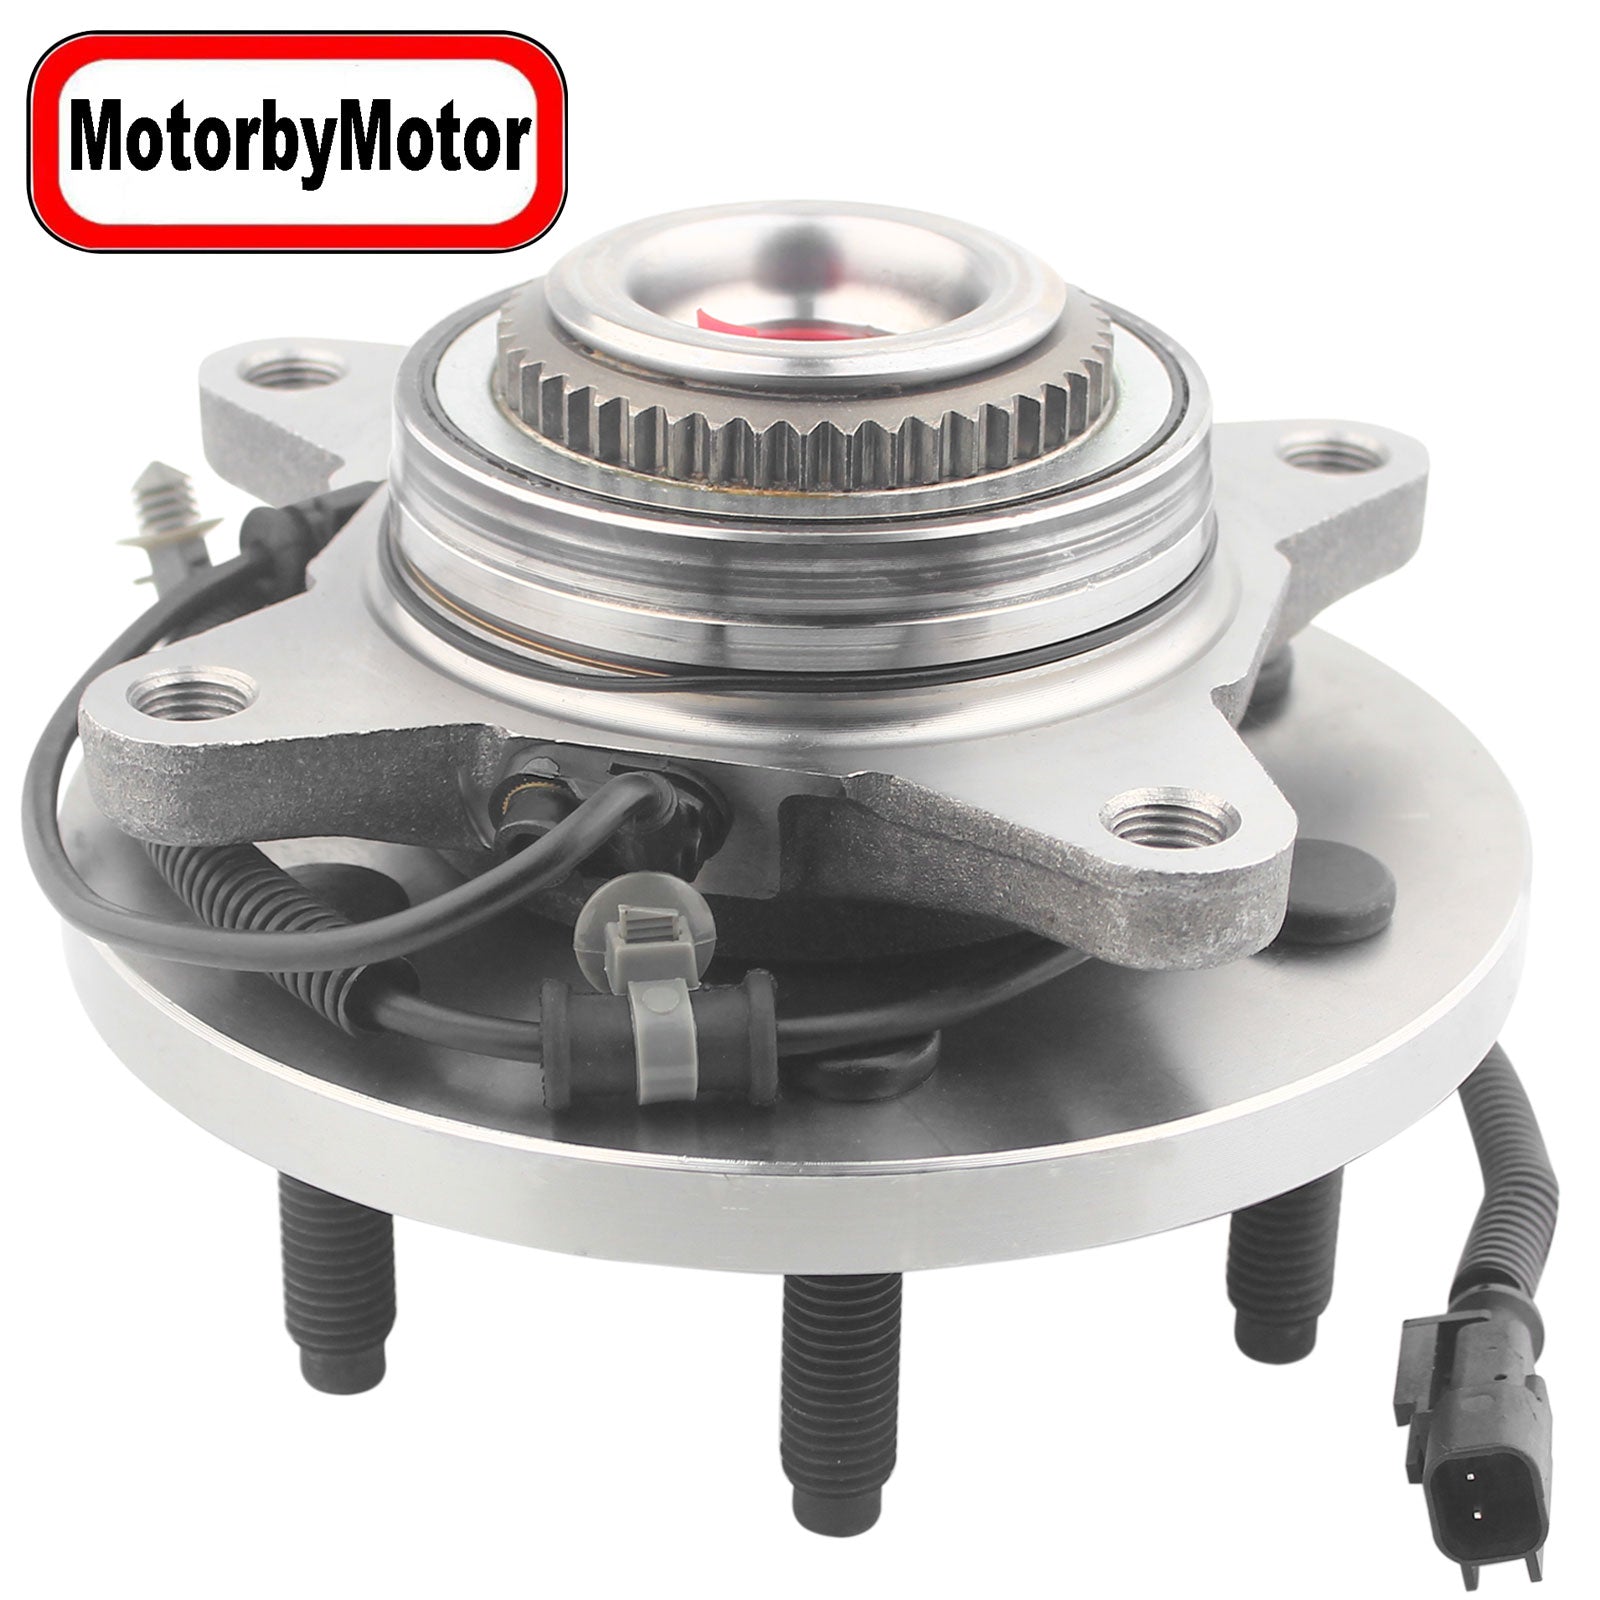 MotorbyMotor 515142 Front Wheel Bearing and Hub Assembly 4WD with 6 LugsFits for Ford F-150 Expedition, Lincoln Navigator Hub Bearing (w/ABS, 4x4; Excludes Heavy Duty) ) MotorbyMotor